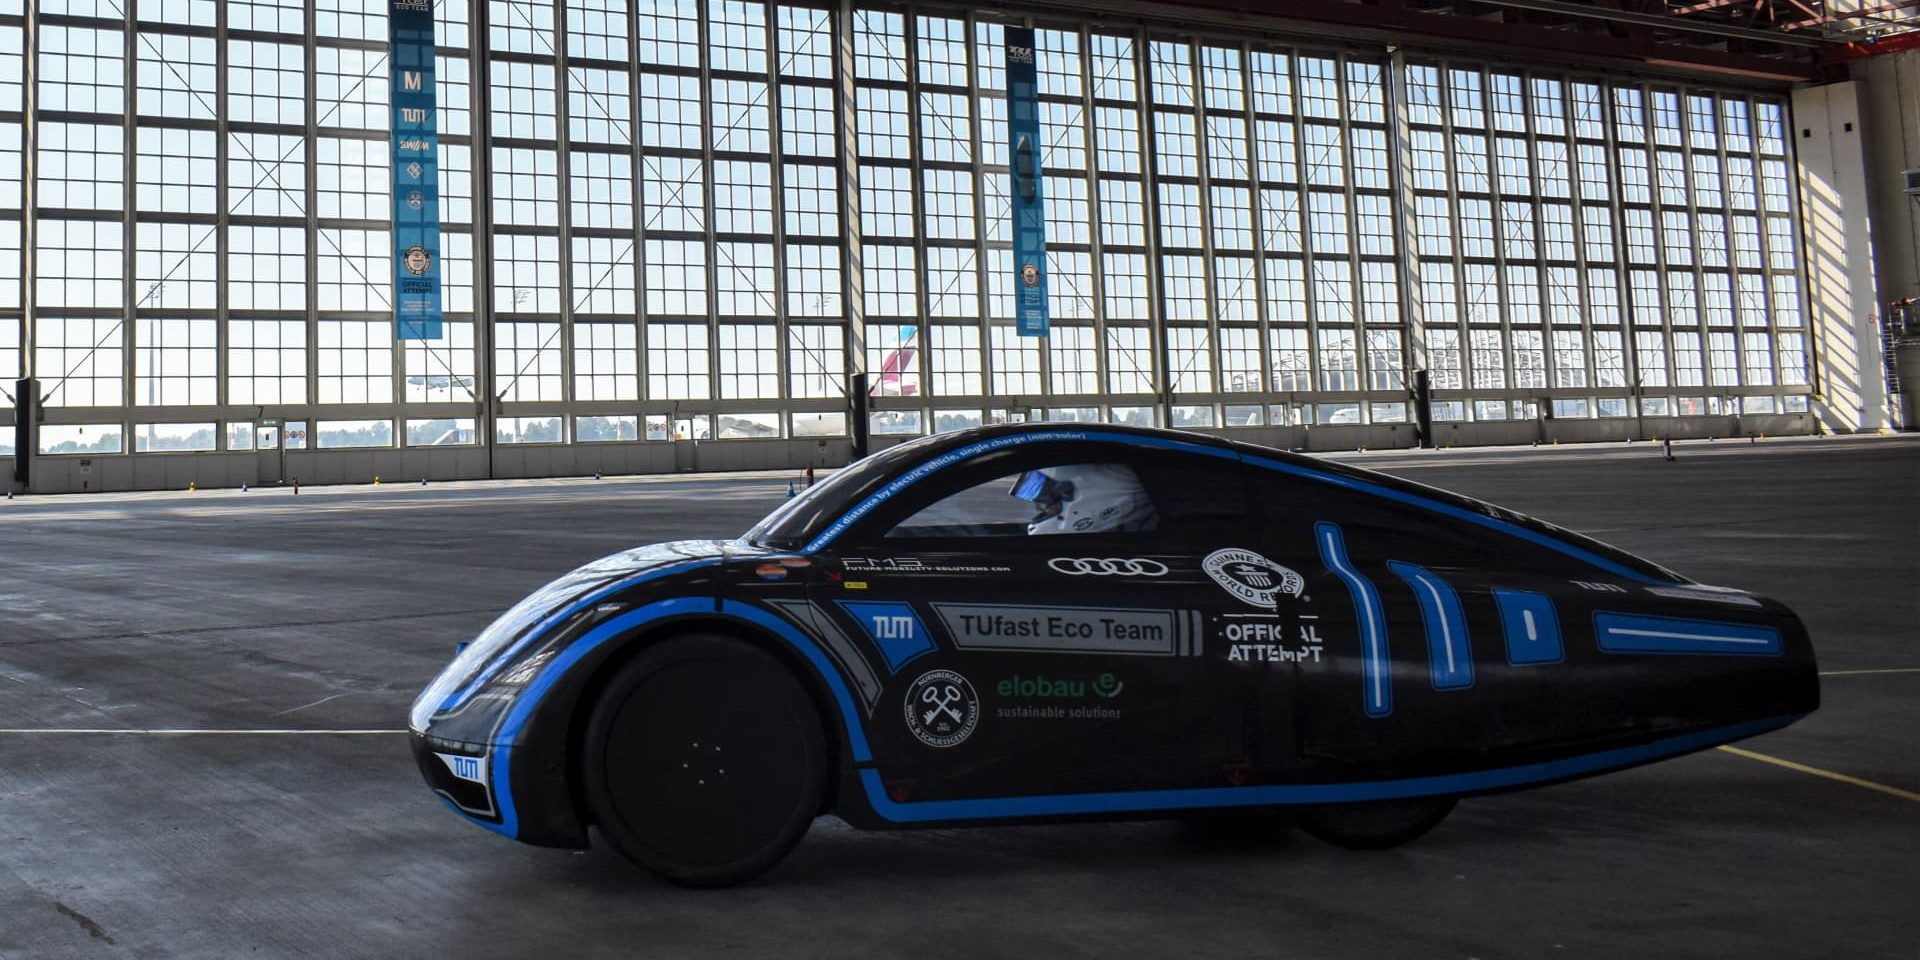 Electric car powered by tiny battery sets new driving range record